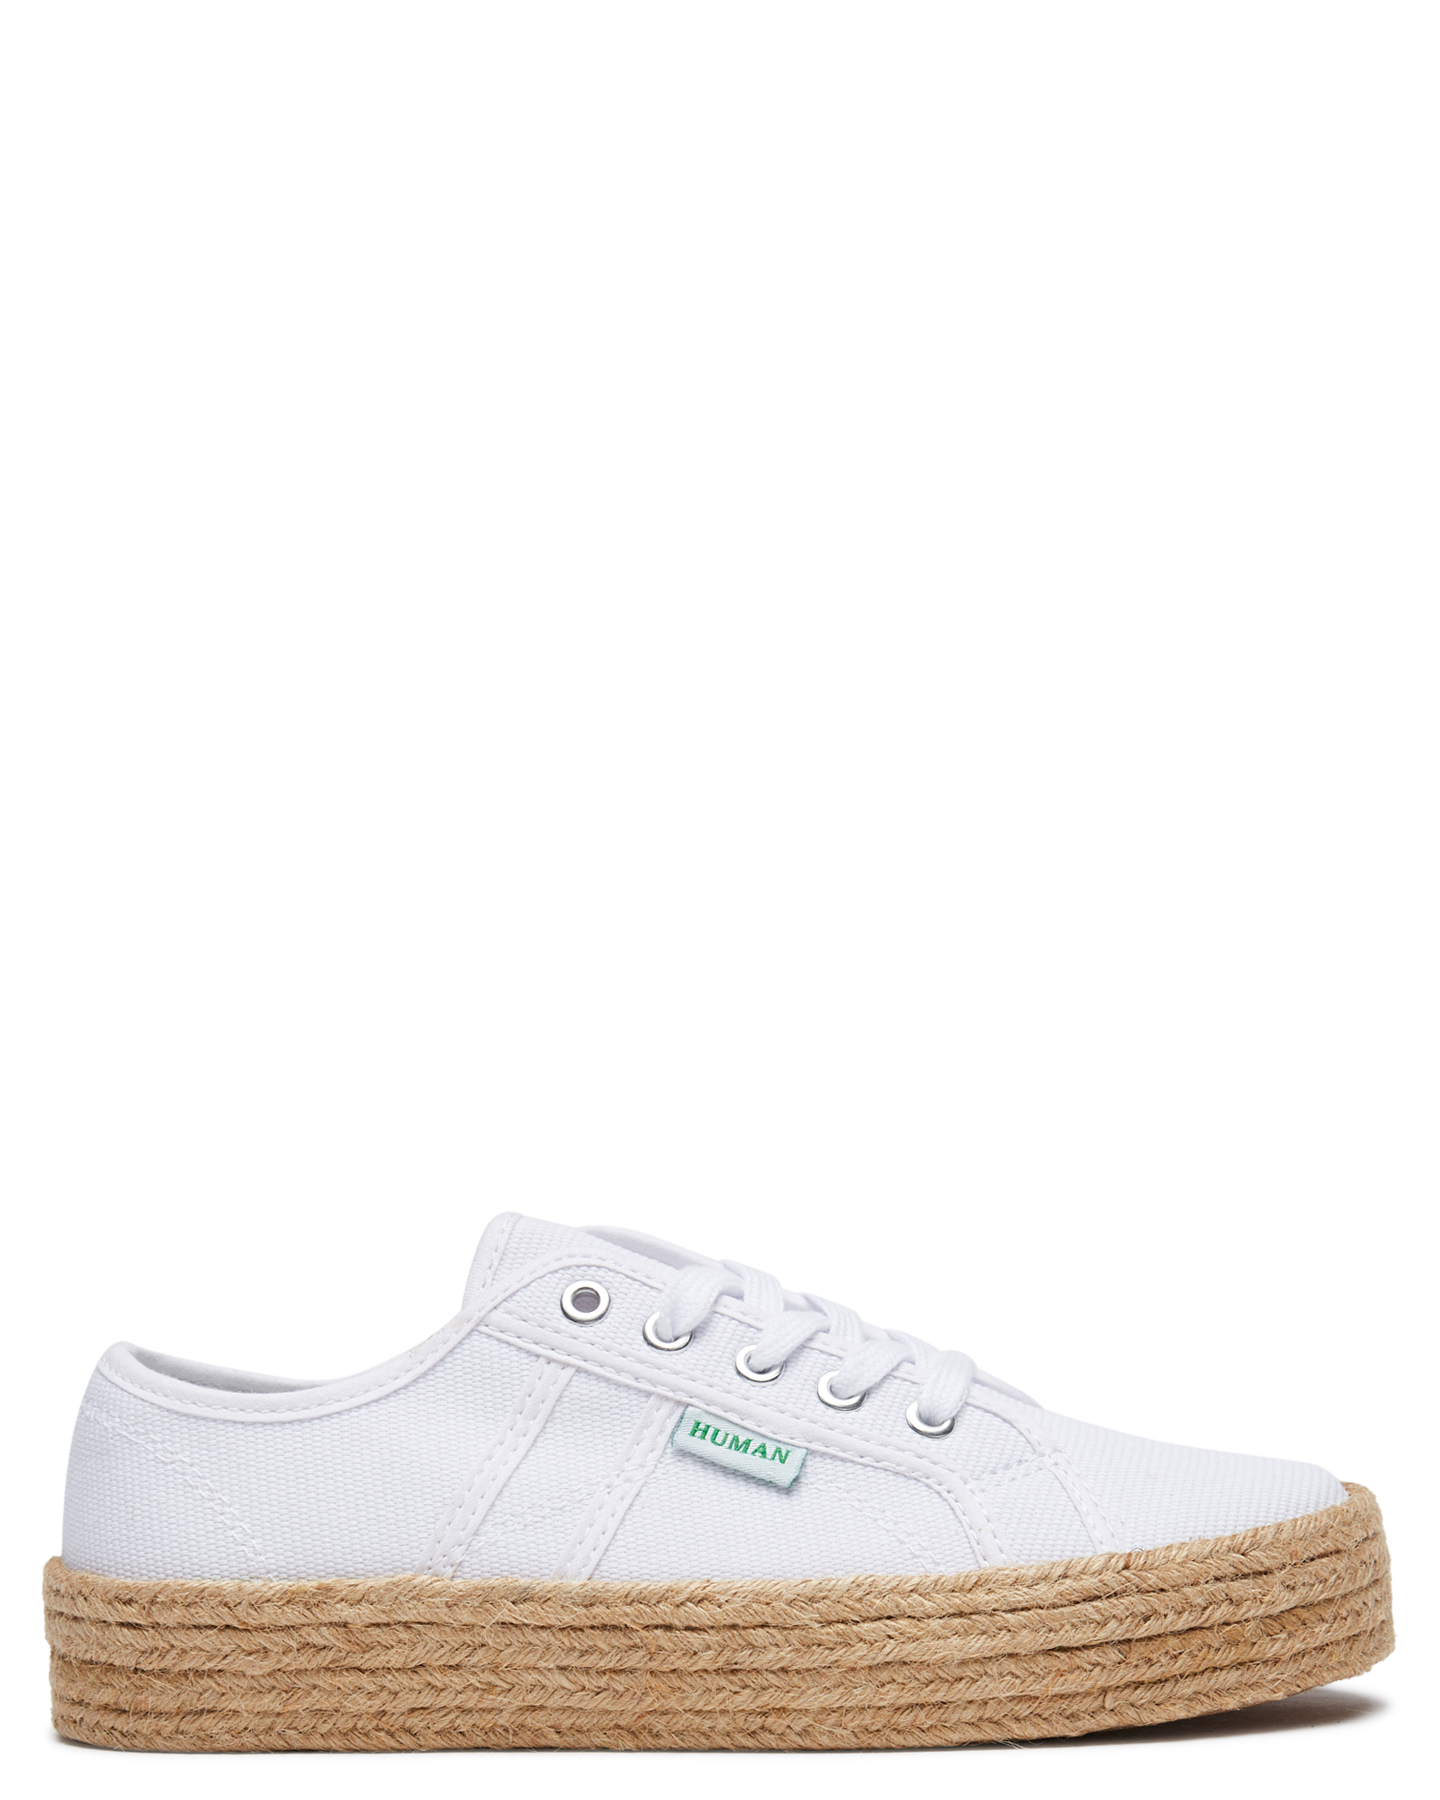 women's white canvas sneakers